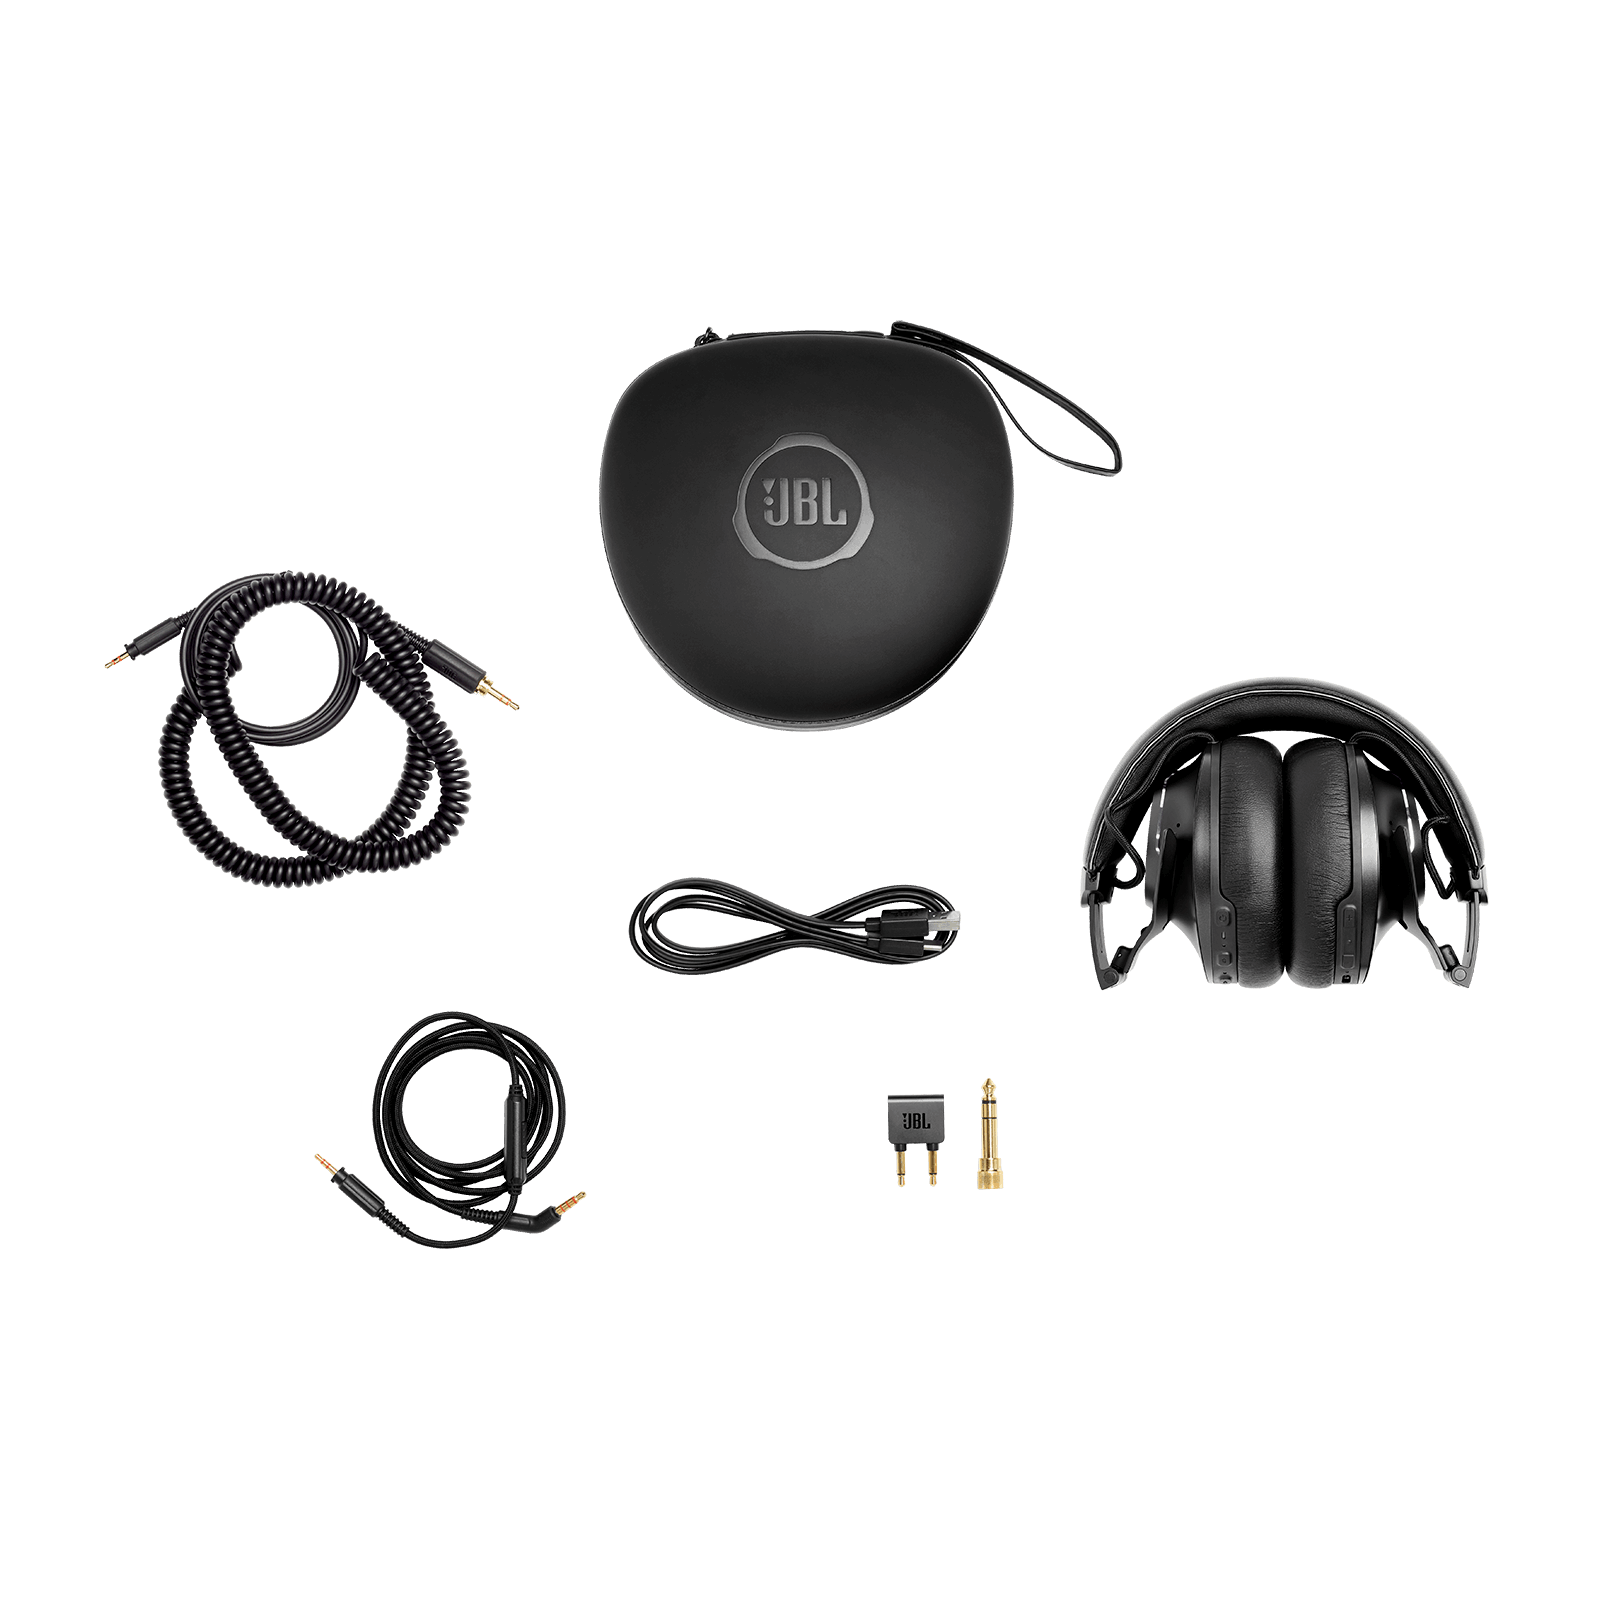 JBL CLUB ONE Wireless, over-ear, True Adaptive Noise Cancelling headphones inspired by pro musicians